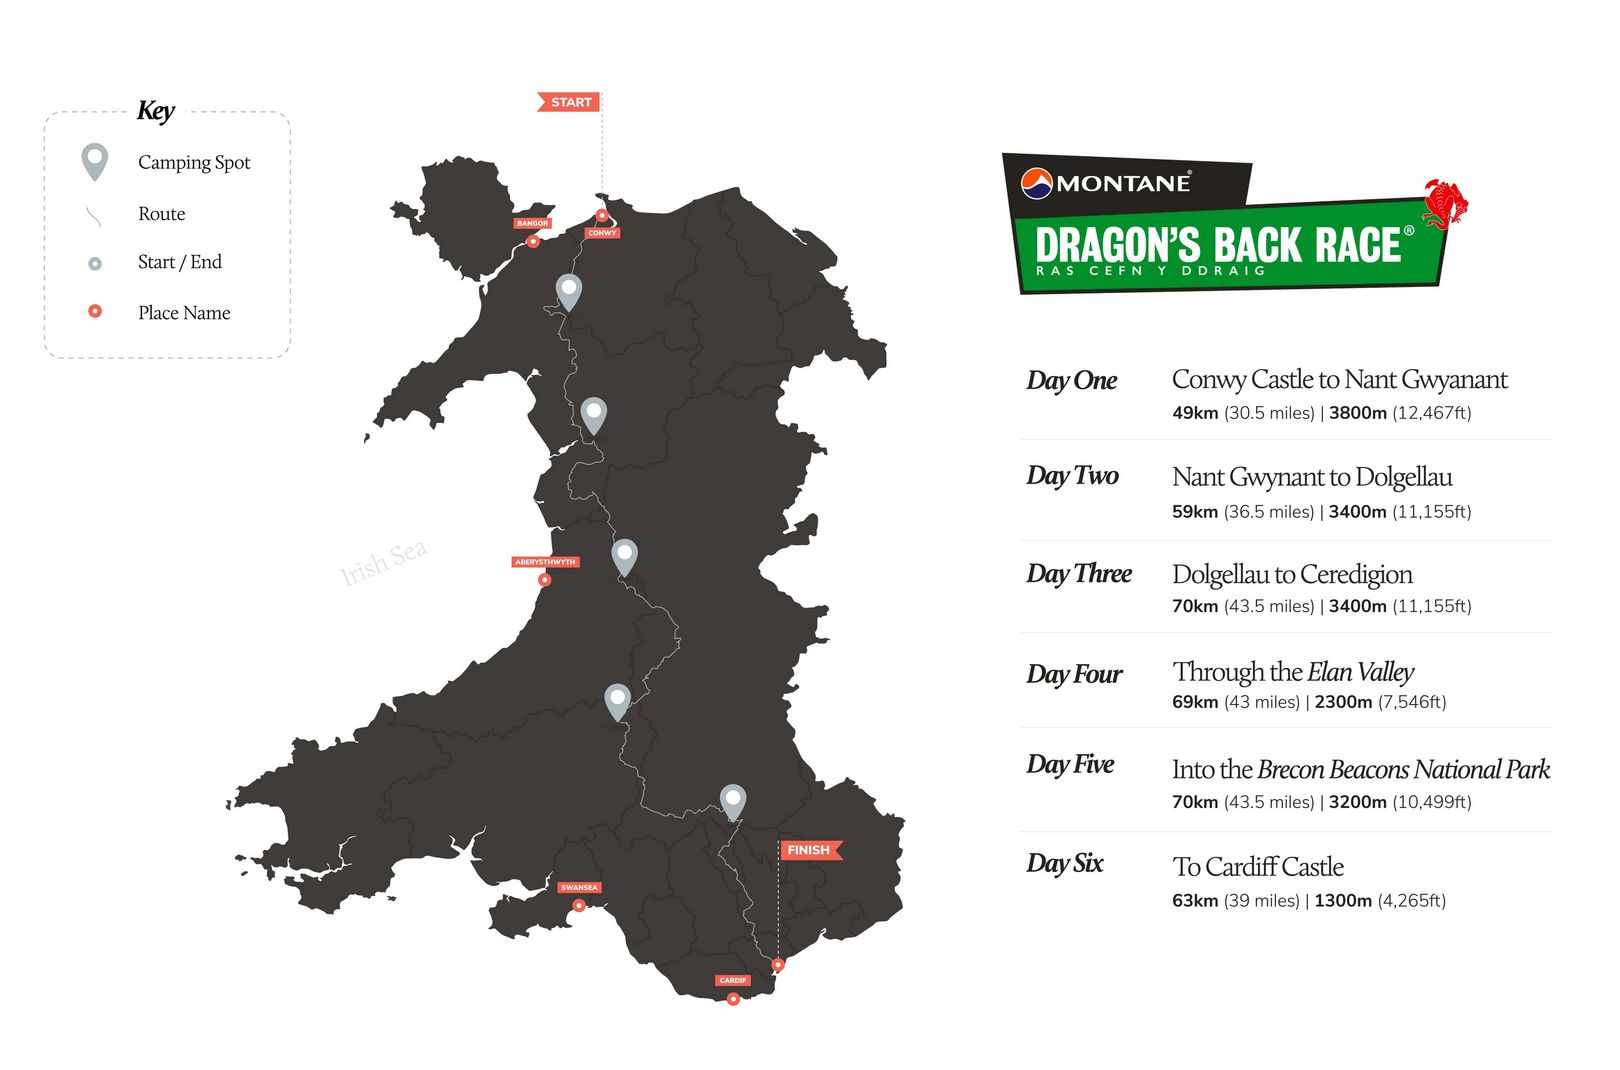 An infographic map of the Dragon's Back Race route